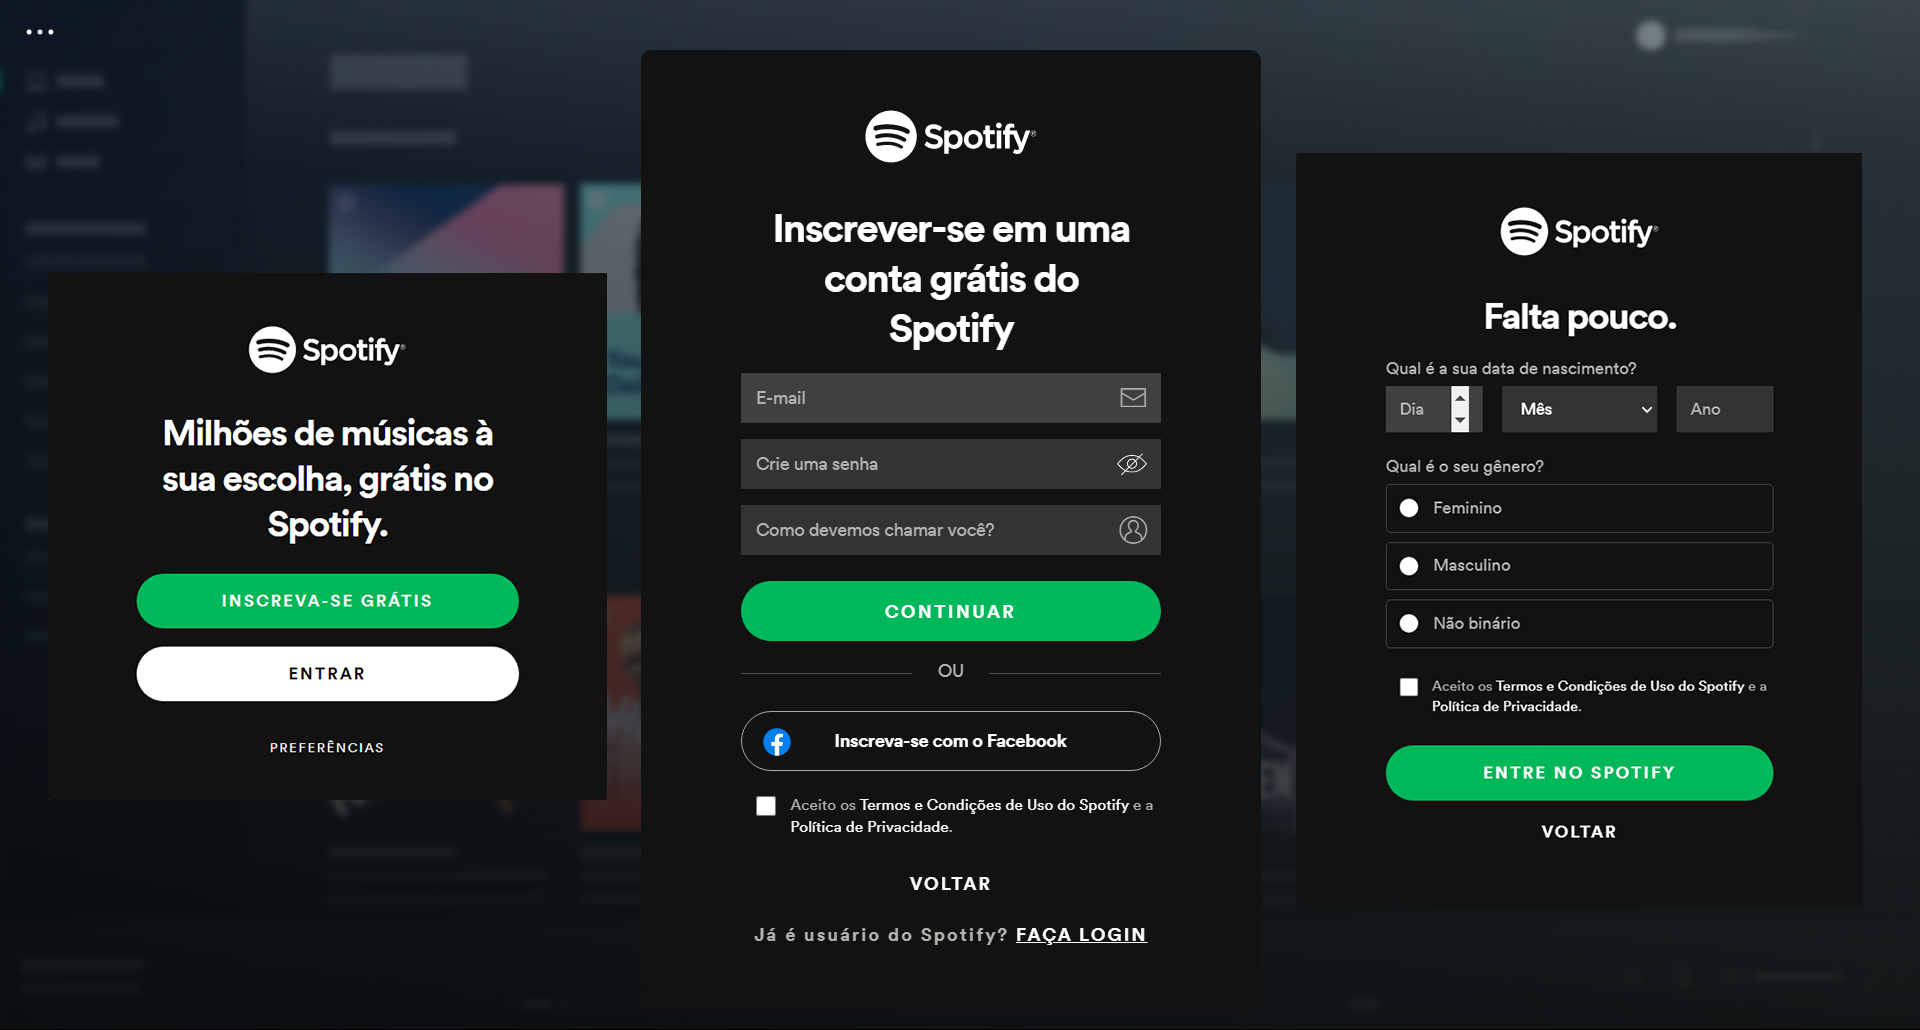 Account creation process in the Spotify app for Windows. (Source: Spotify, Adriano Camacho)